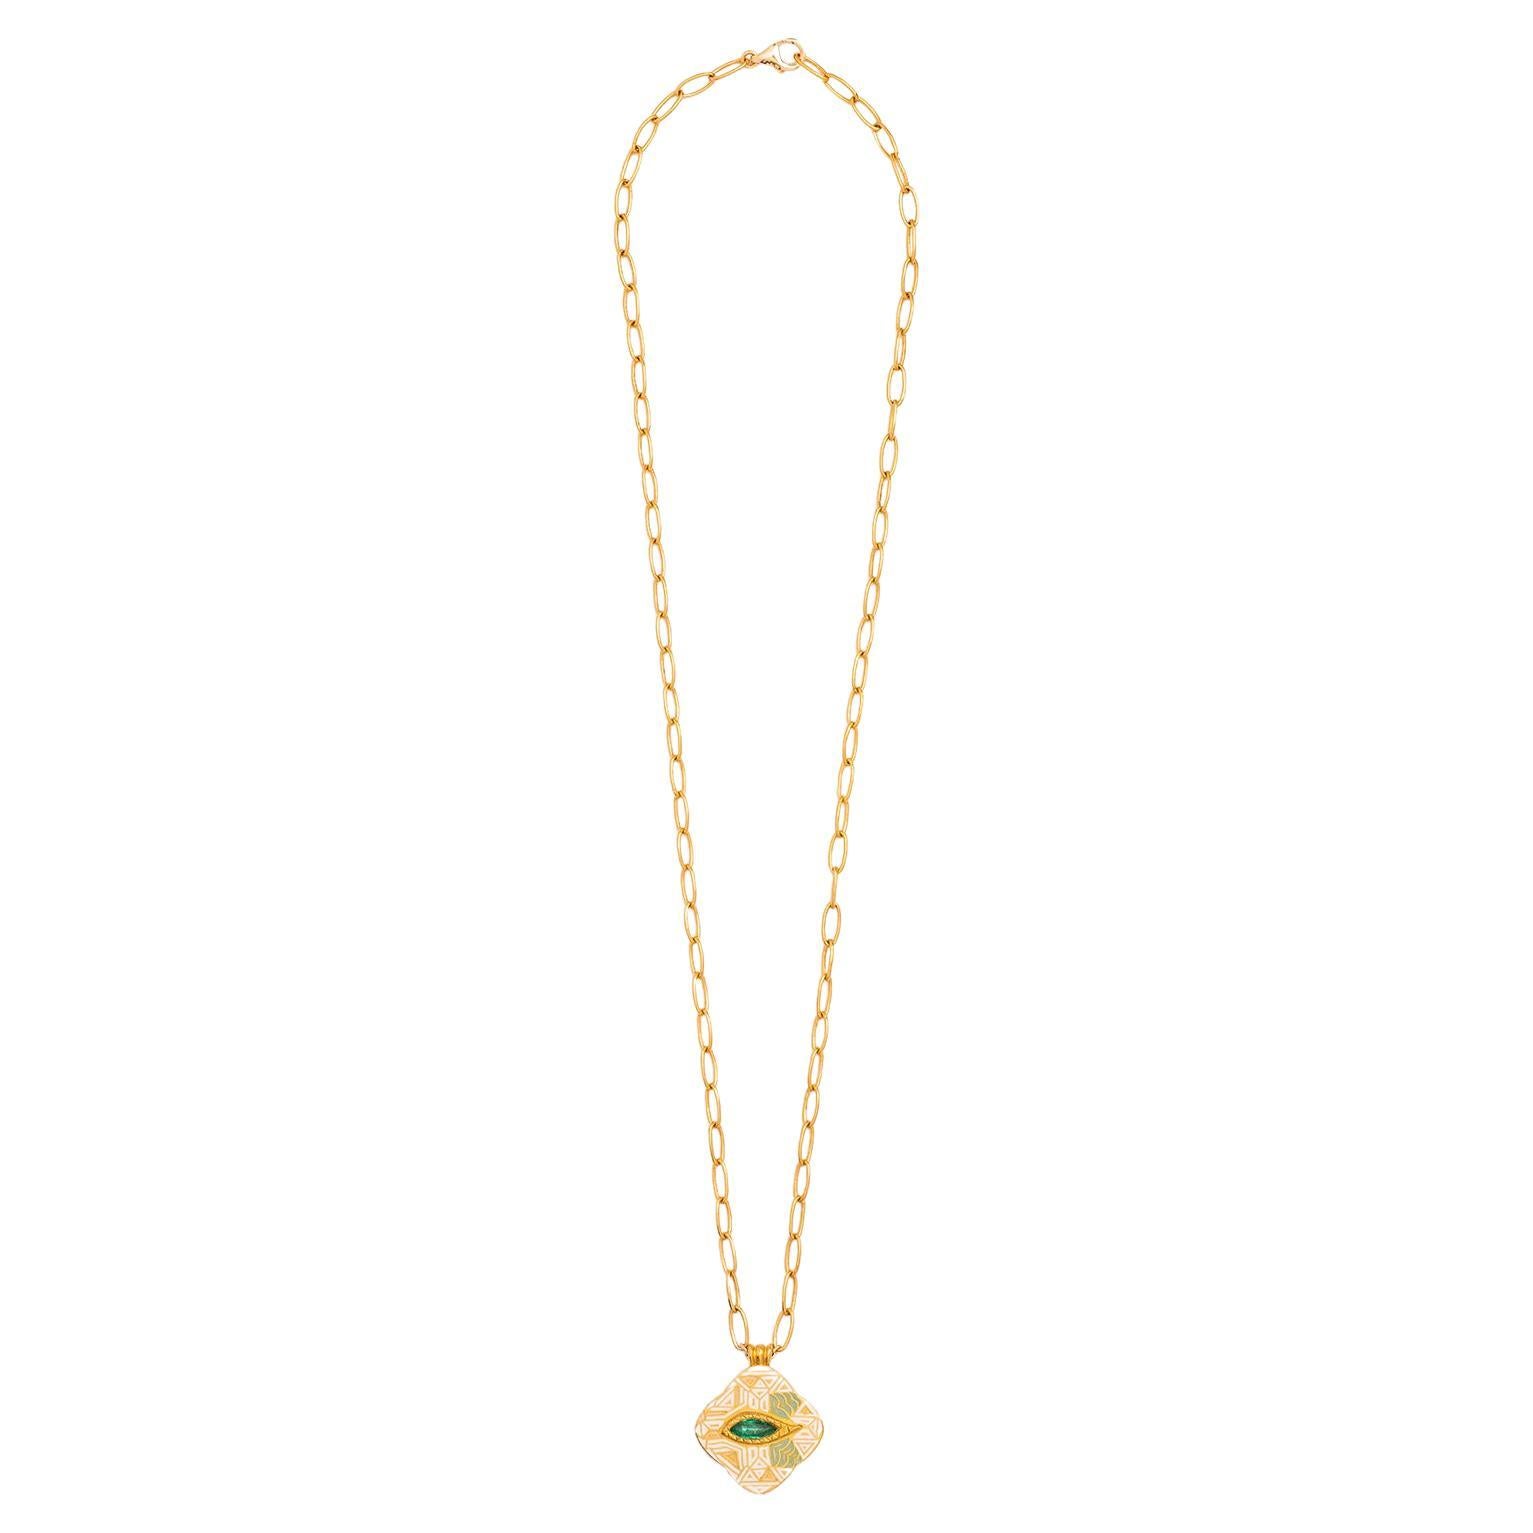 23.5K Gold Enamel Eye Pendant Necklace with 0.6 Carat Marquise Emerald by Agaro For Sale 3